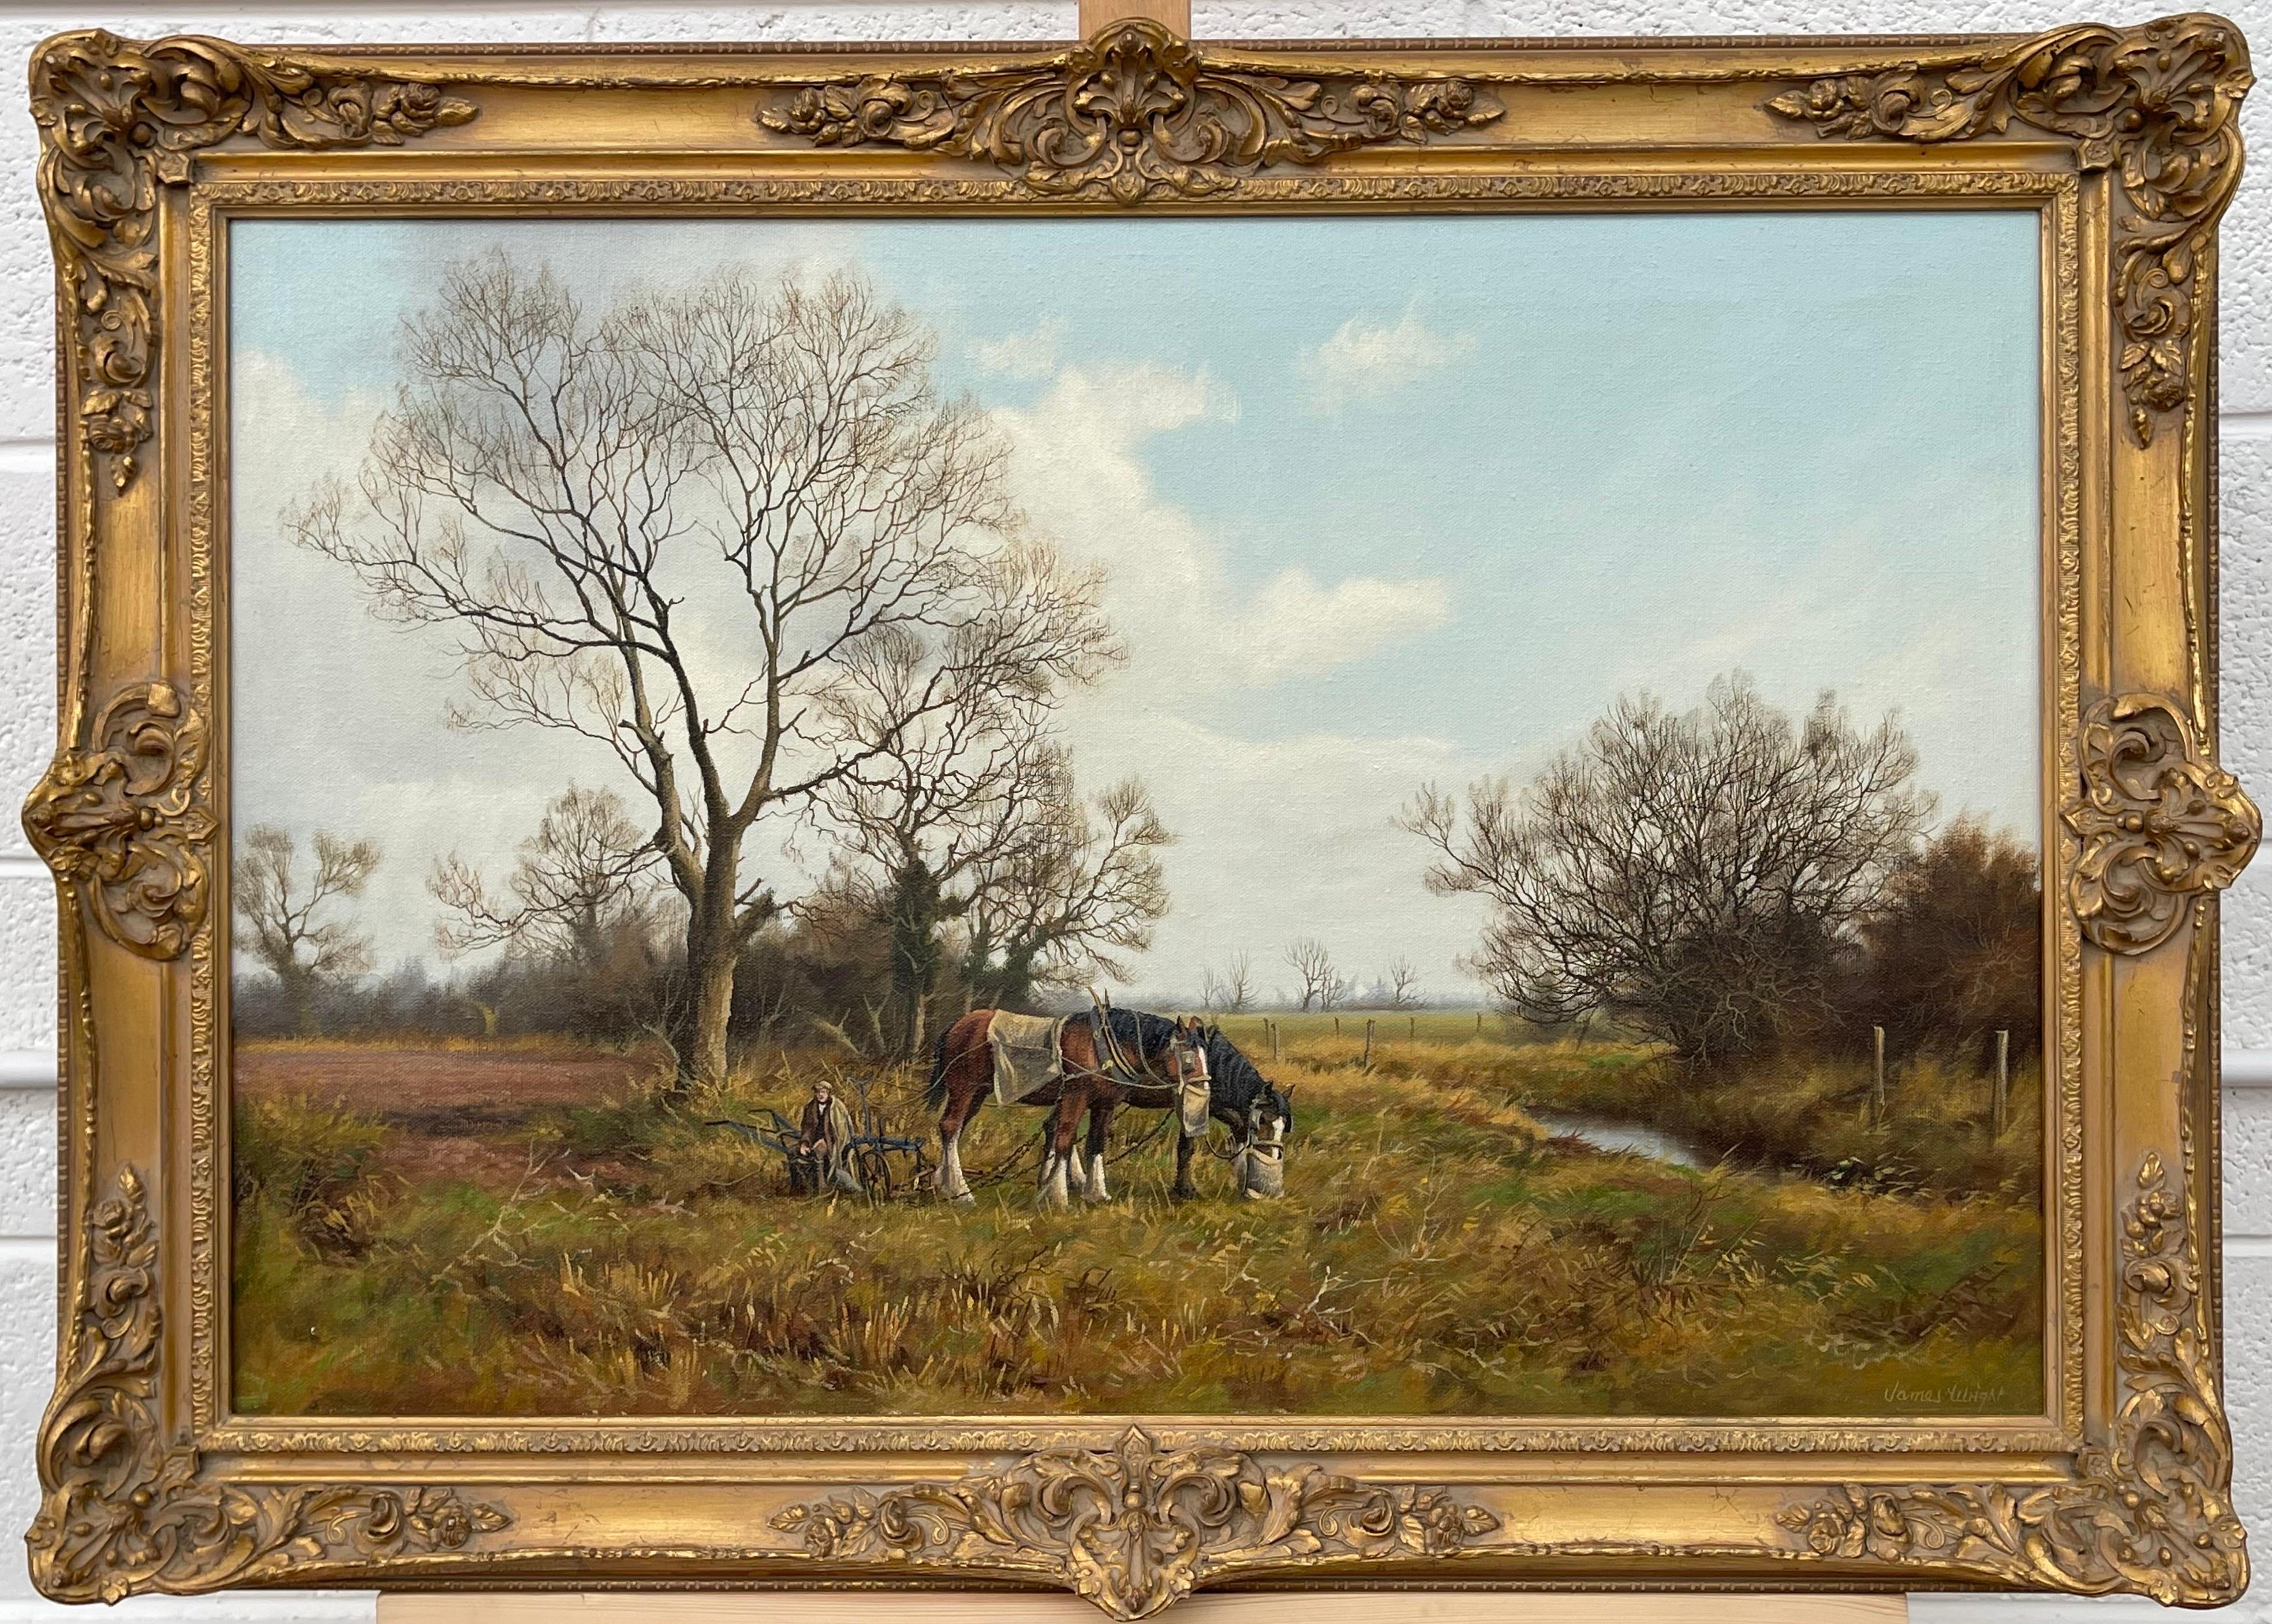 Painting of English Countryside with Horses & Plough by Modern British Artist